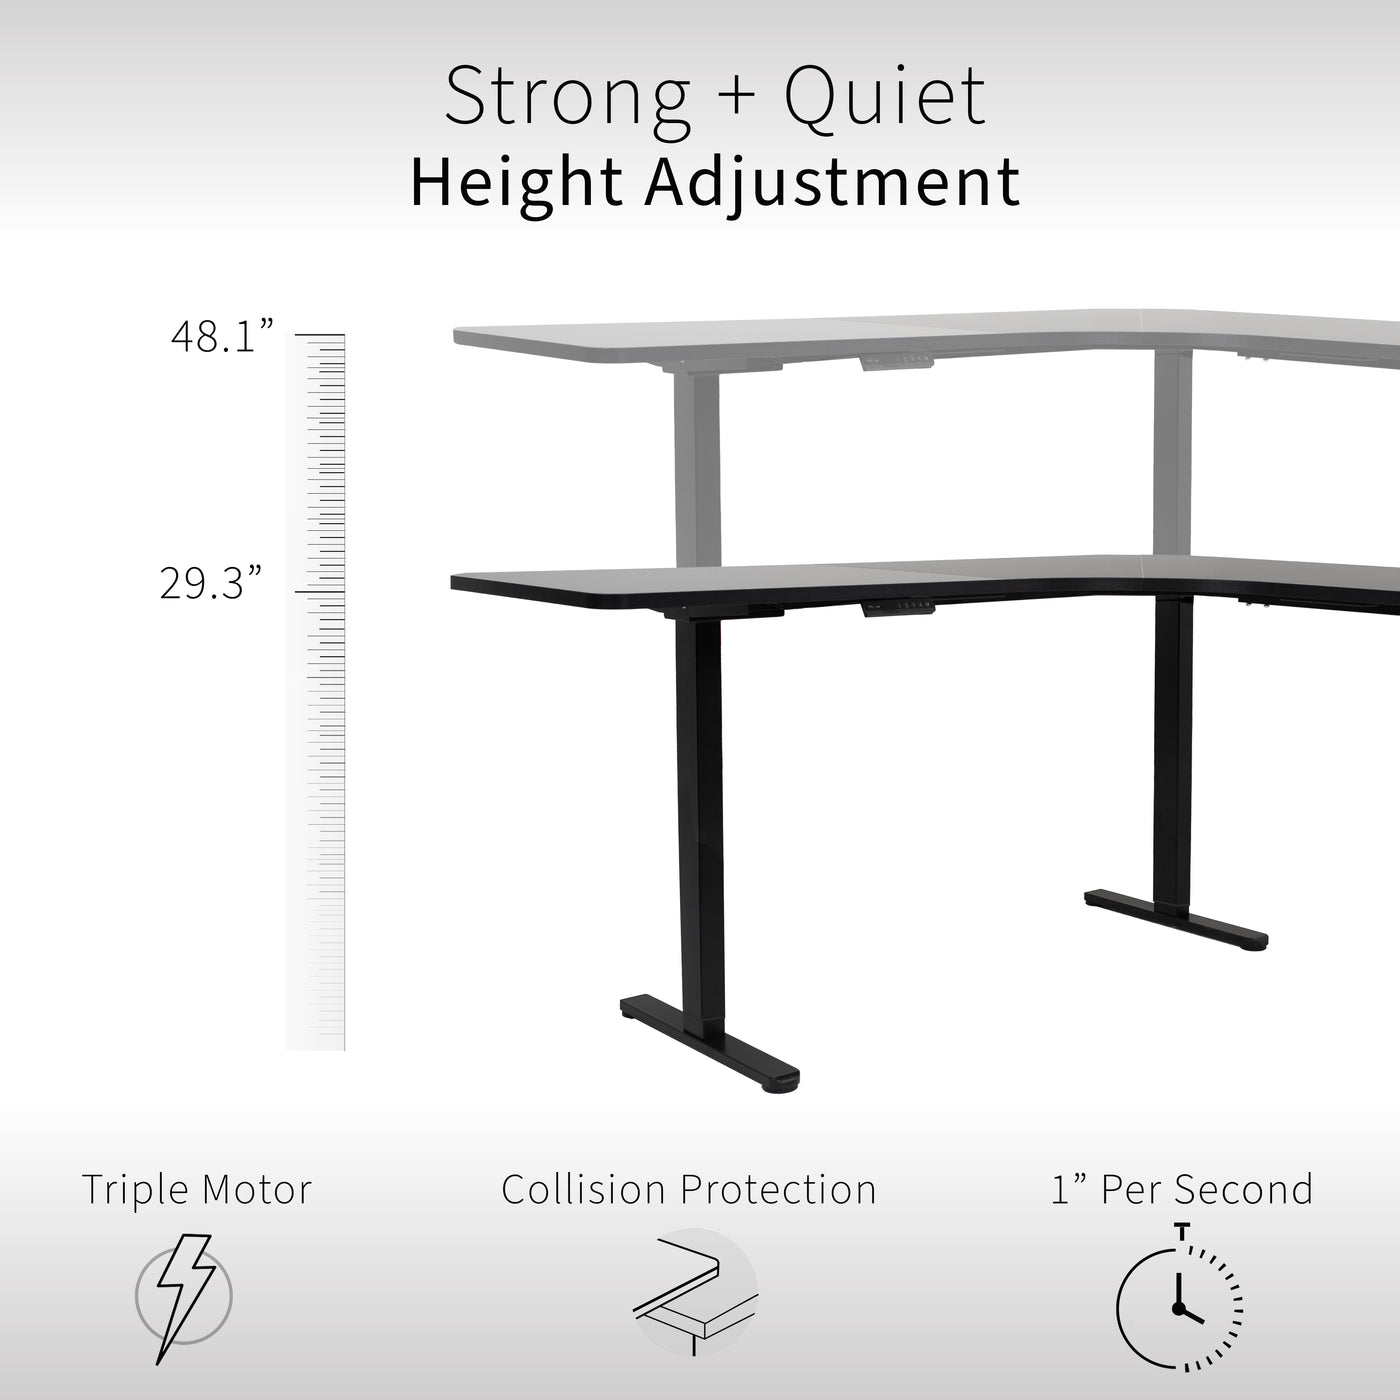 Sturdy yet quiet height adjustment provided with a triple motor system and collision prevention.